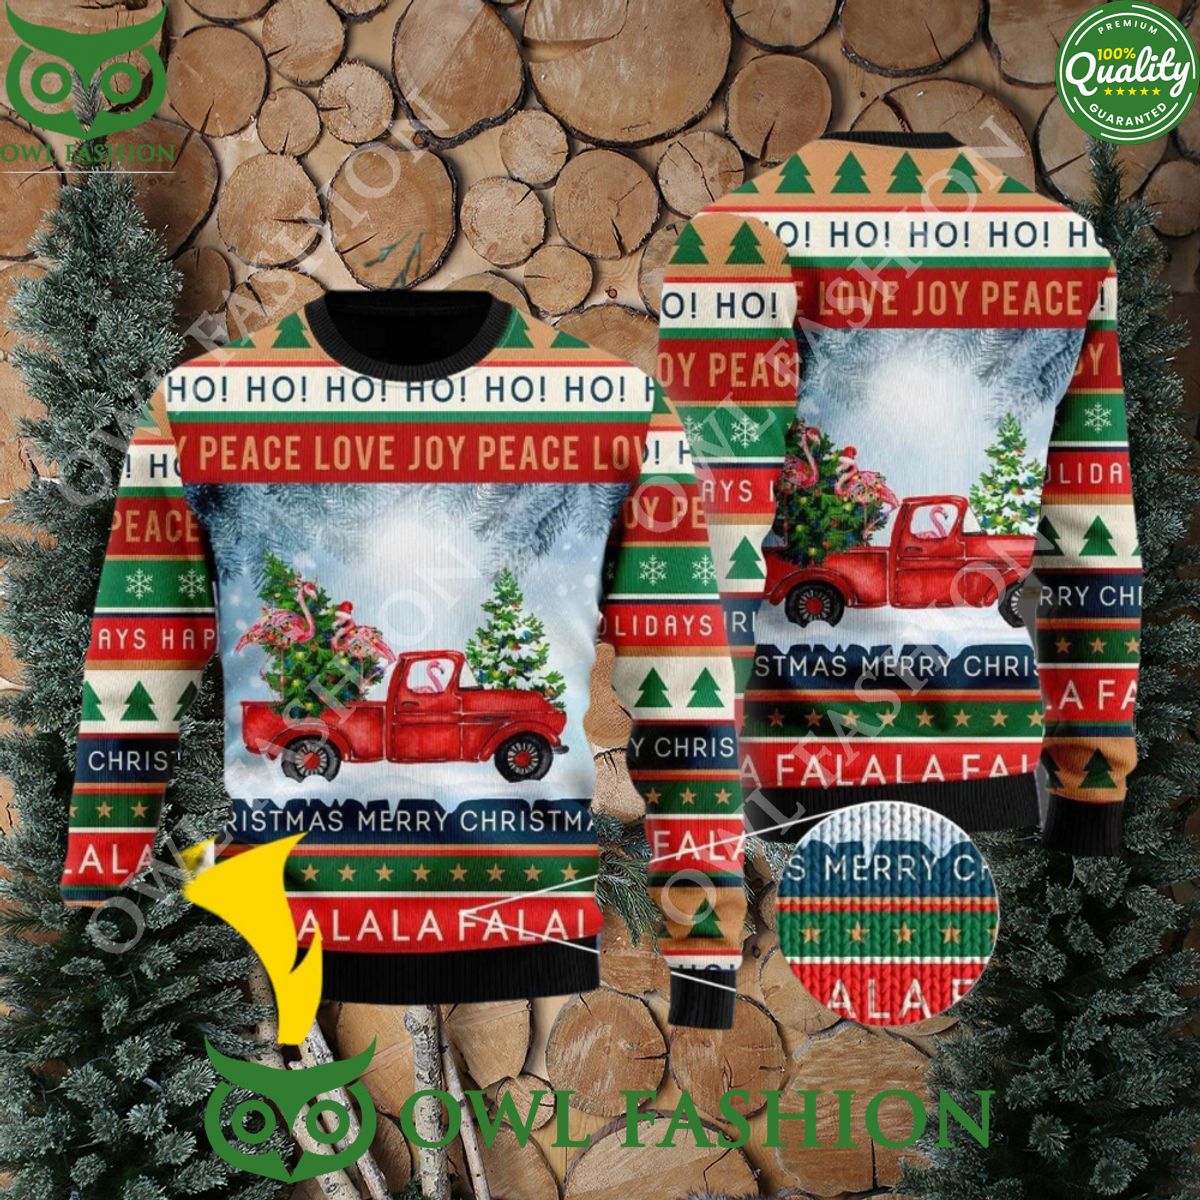 xmas flamingos ride red truck christmas ugly sweater 3d 1 5rtNg.jpg